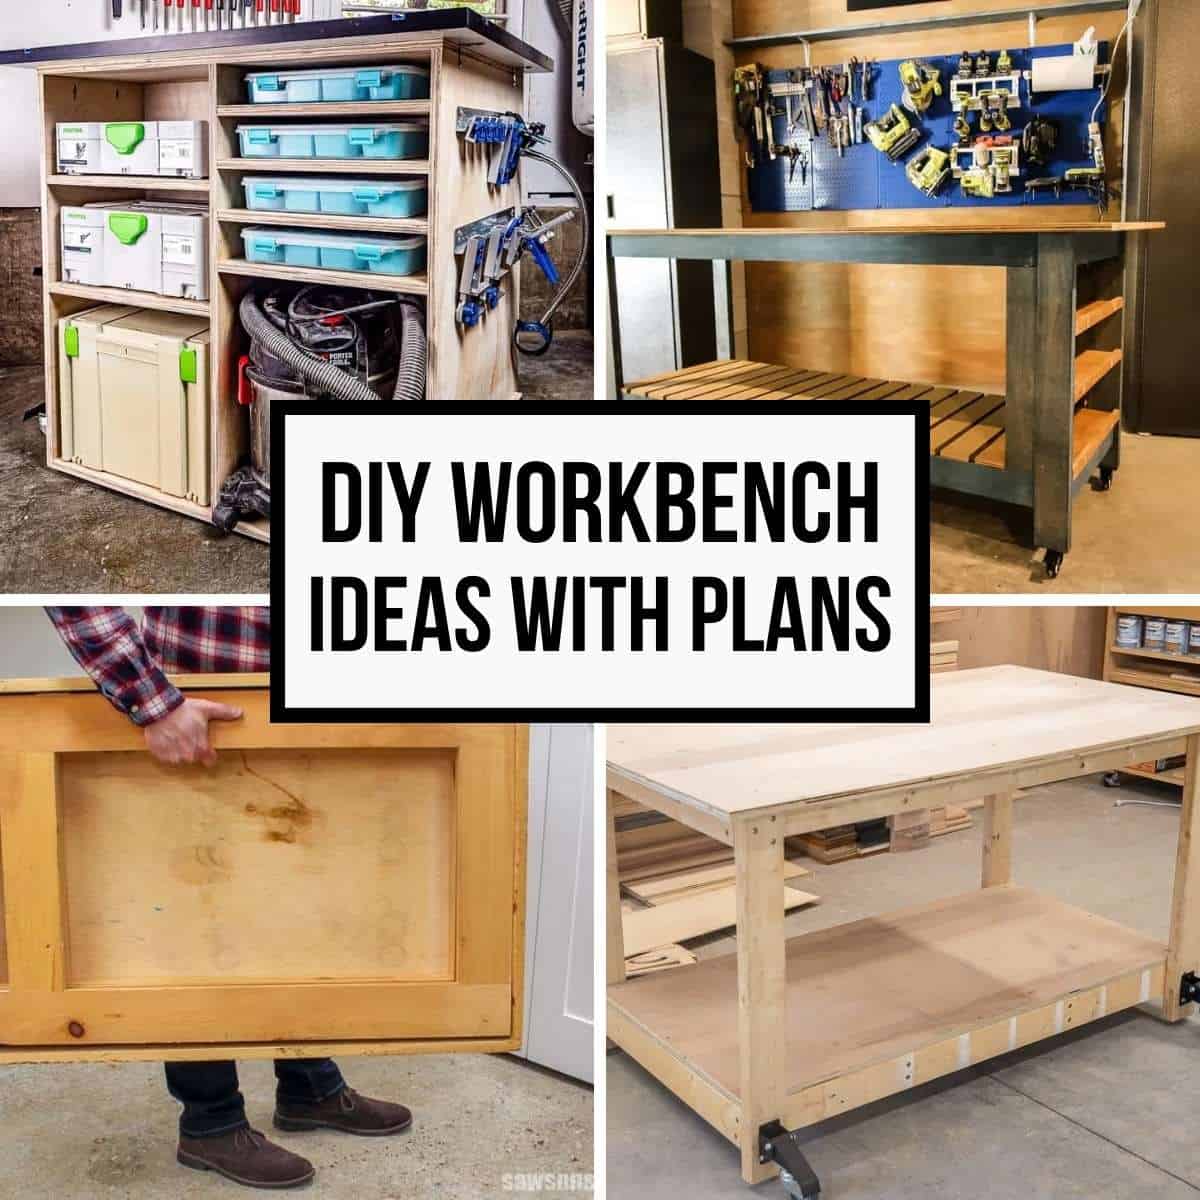 Image collage of four DIY workbench ideas with text overlay "DIY workbench ideas with plans"